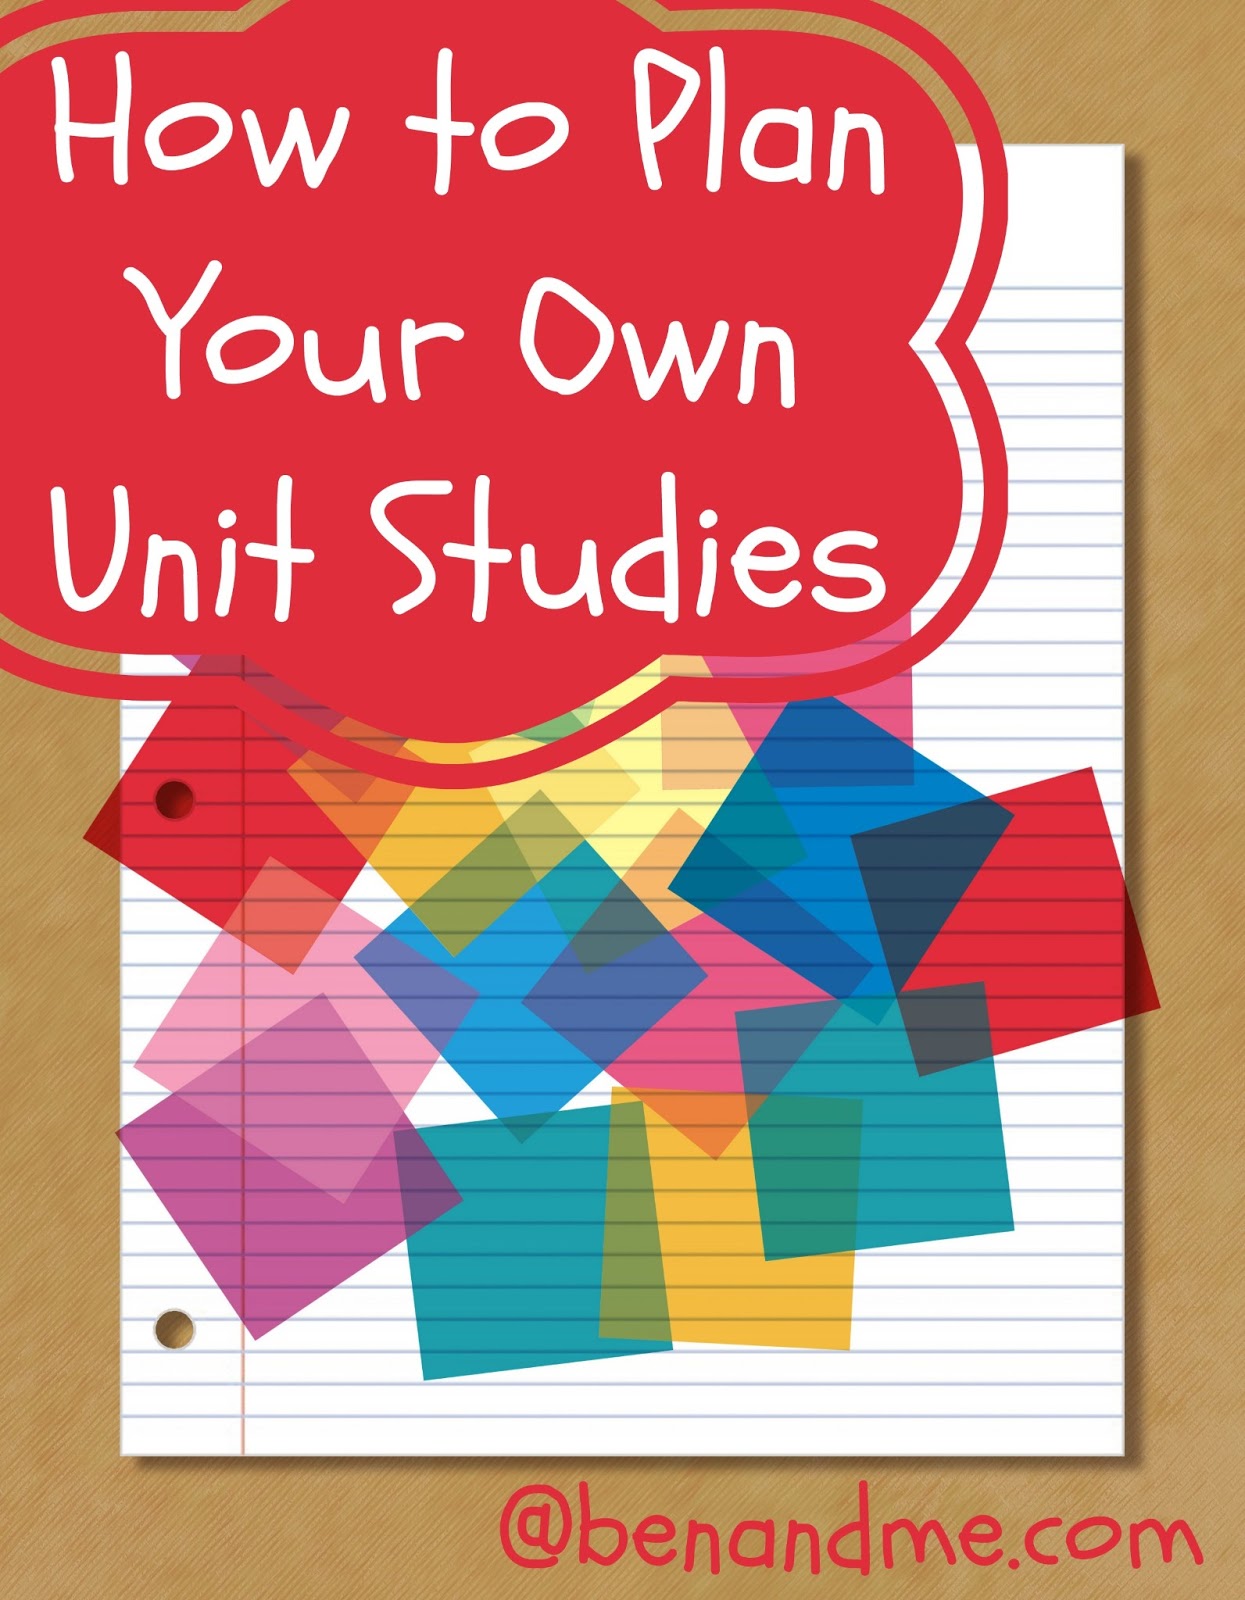 5 easy steps to help you plan your own unit studies!